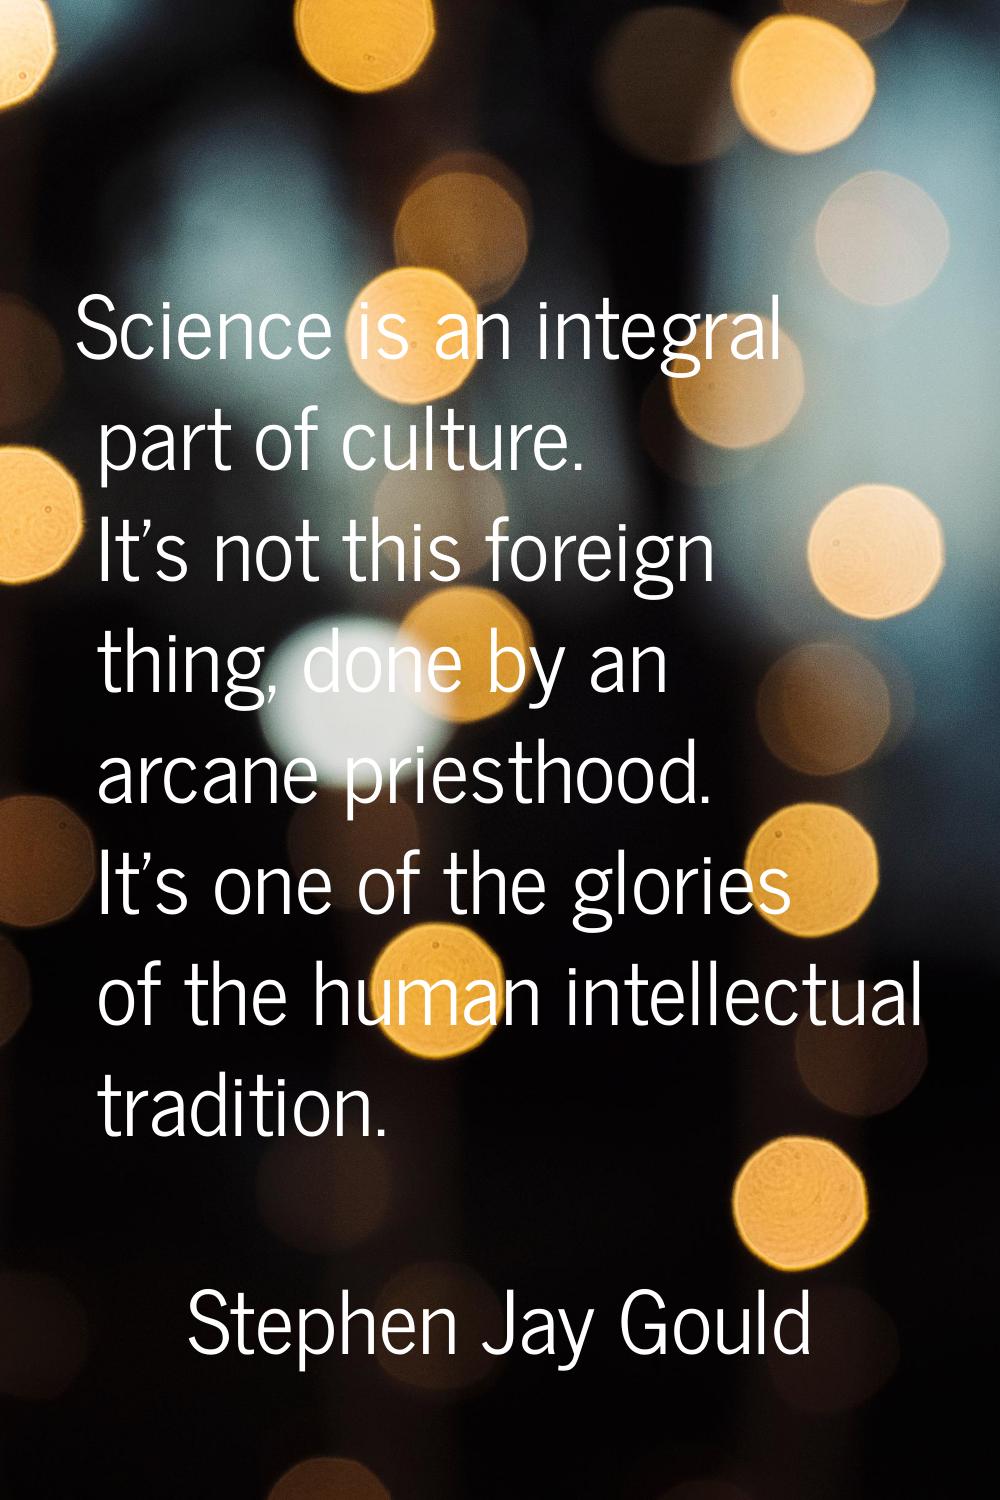 Science is an integral part of culture. It's not this foreign thing, done by an arcane priesthood. 